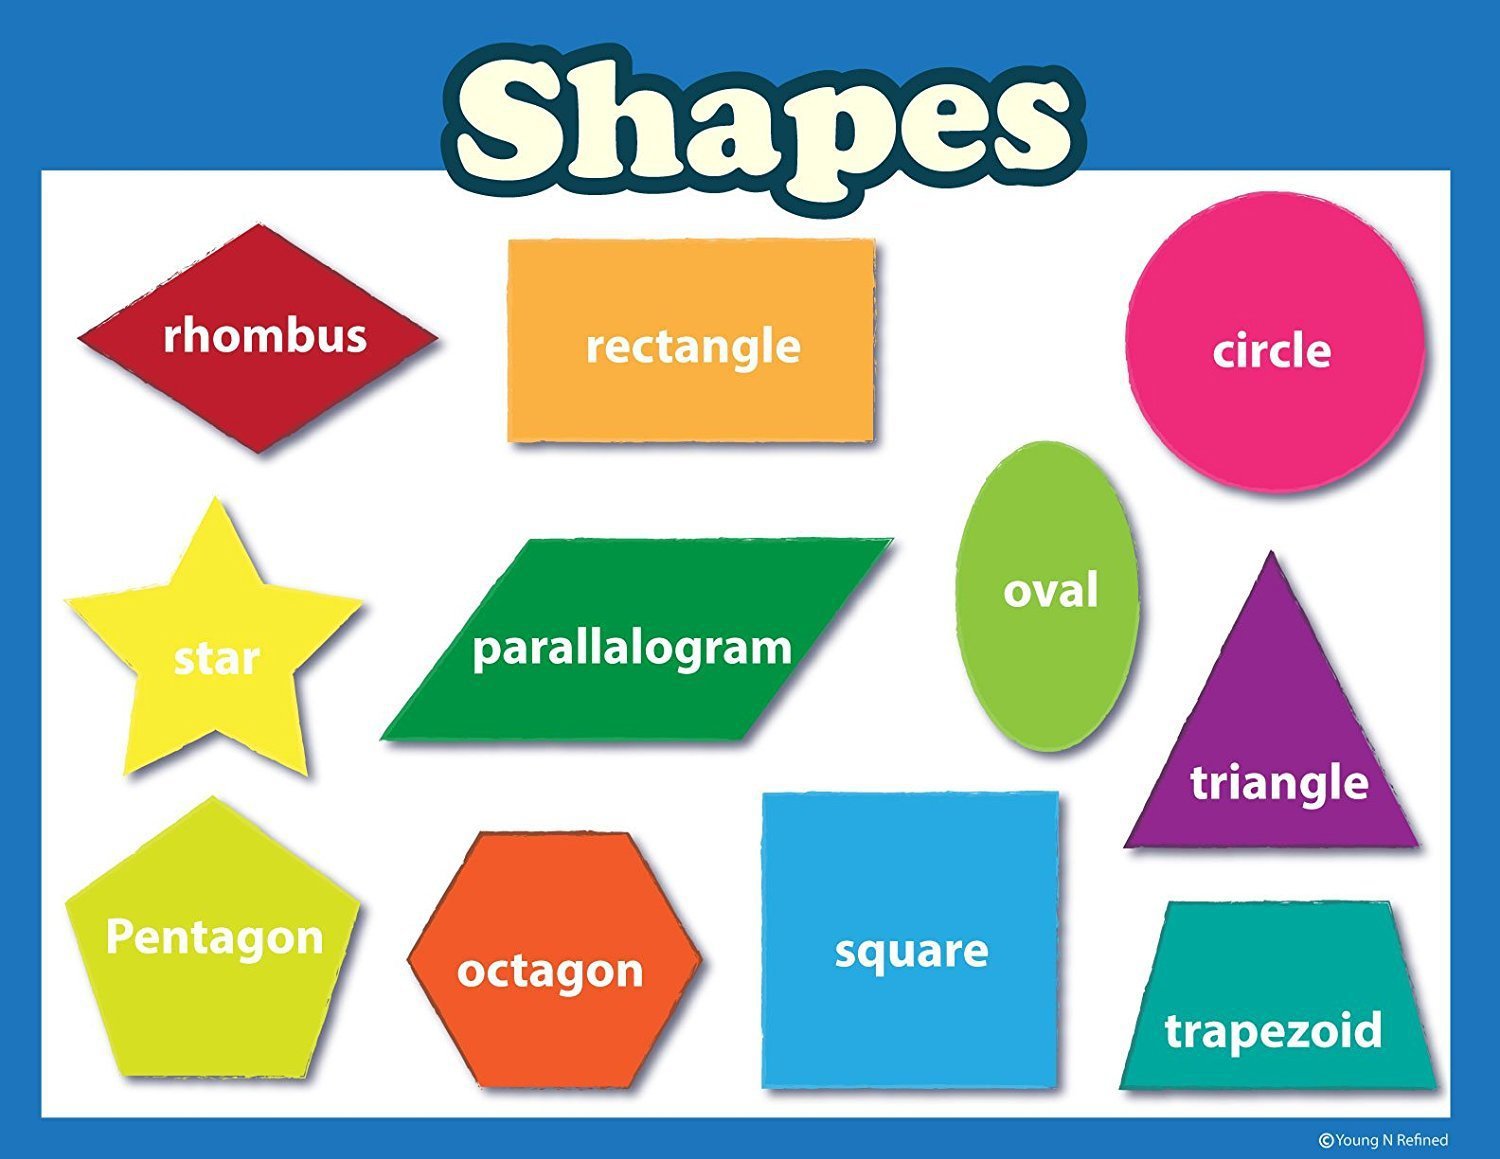 Shapes Poster Landscape laminated for teachers and educators classroom décor and presentation poster clear read from distance edu 22x17 - Young N' Refined